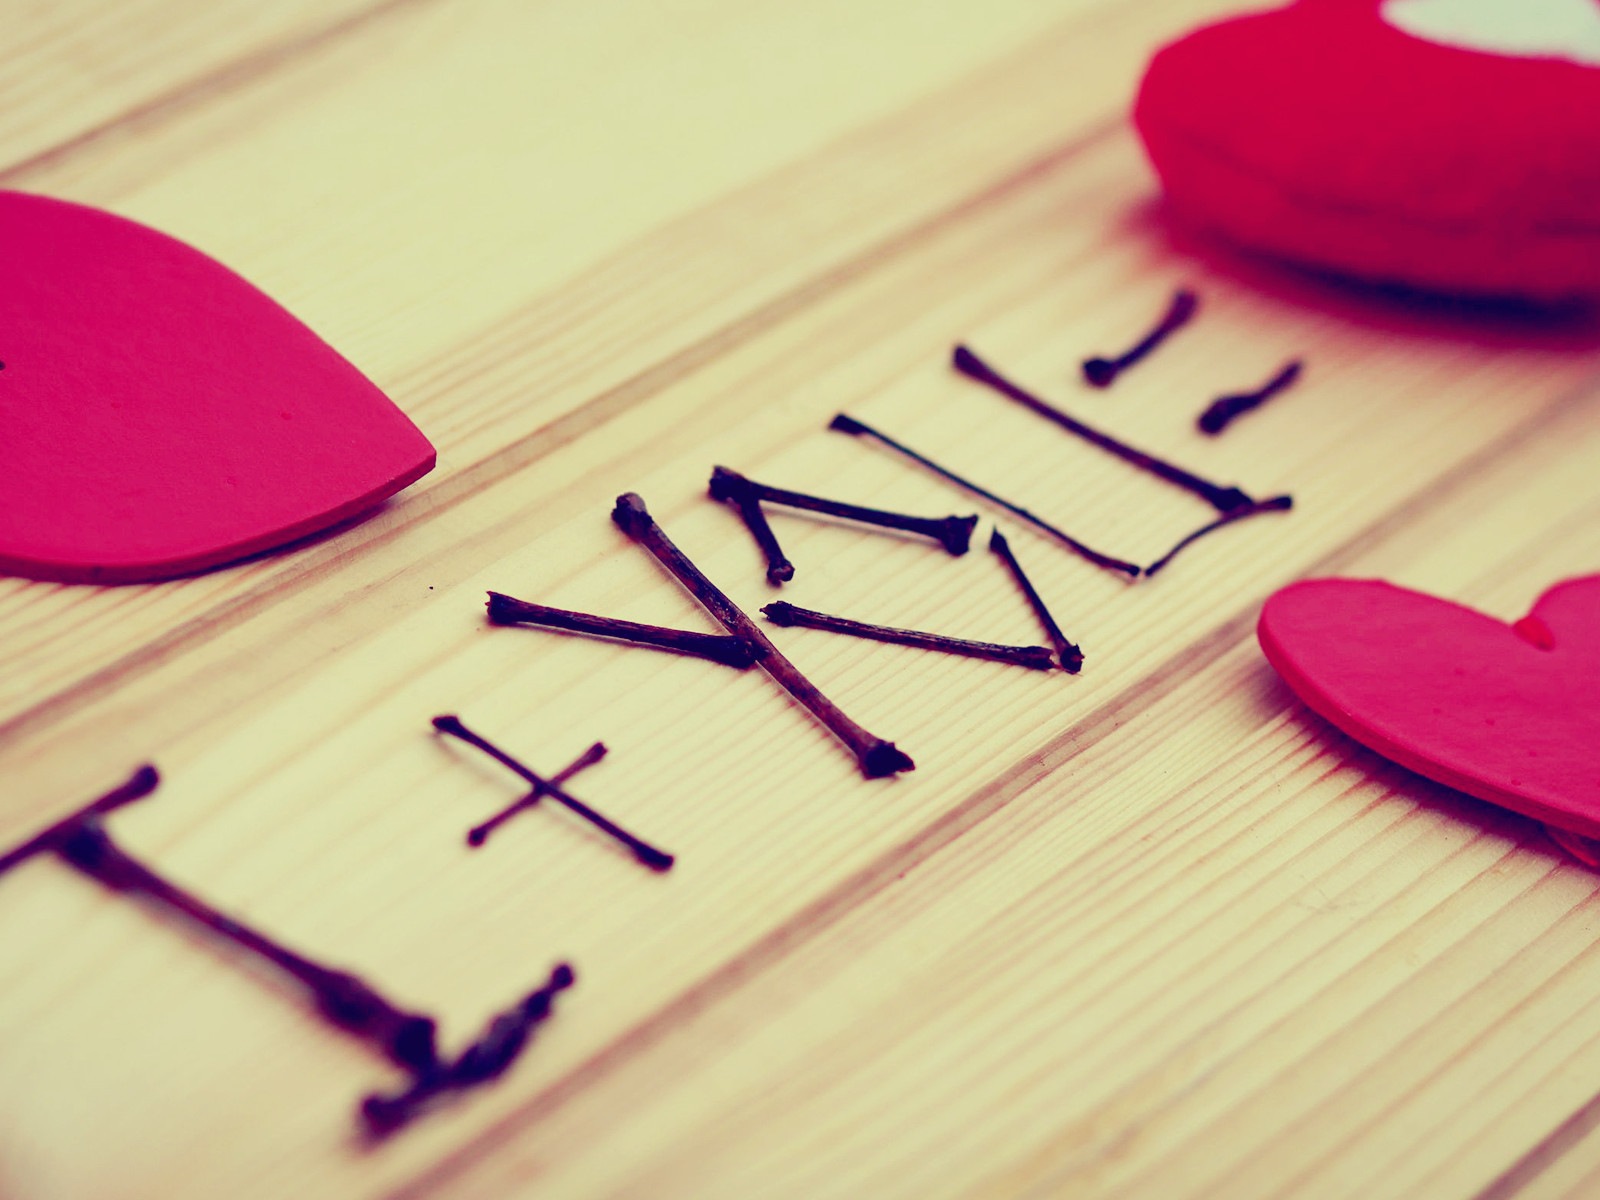 The theme of love, creative heart-shaped HD wallpapers #4 - 1600x1200